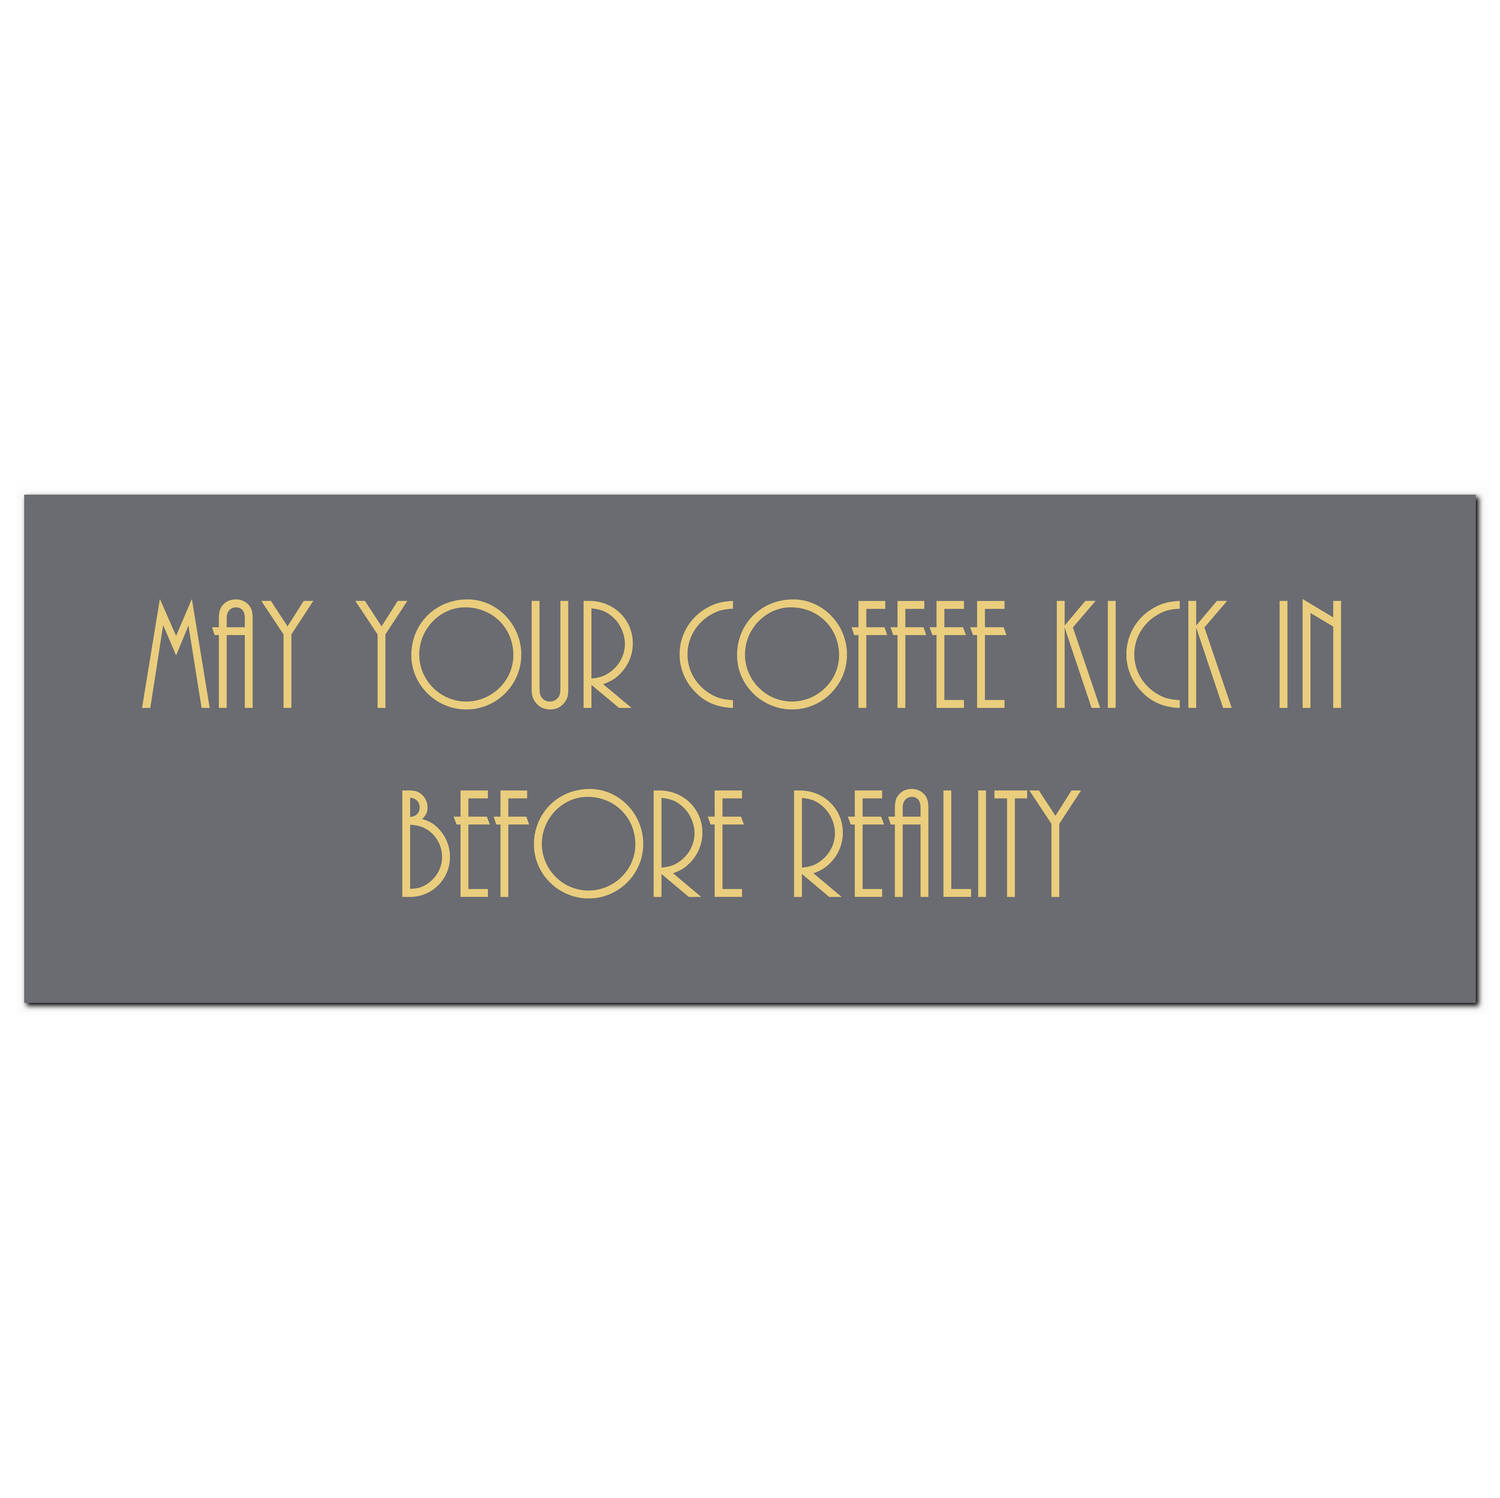 May Your Coffee Kick In Before Reality Gold Foil  Plaque - Image 1